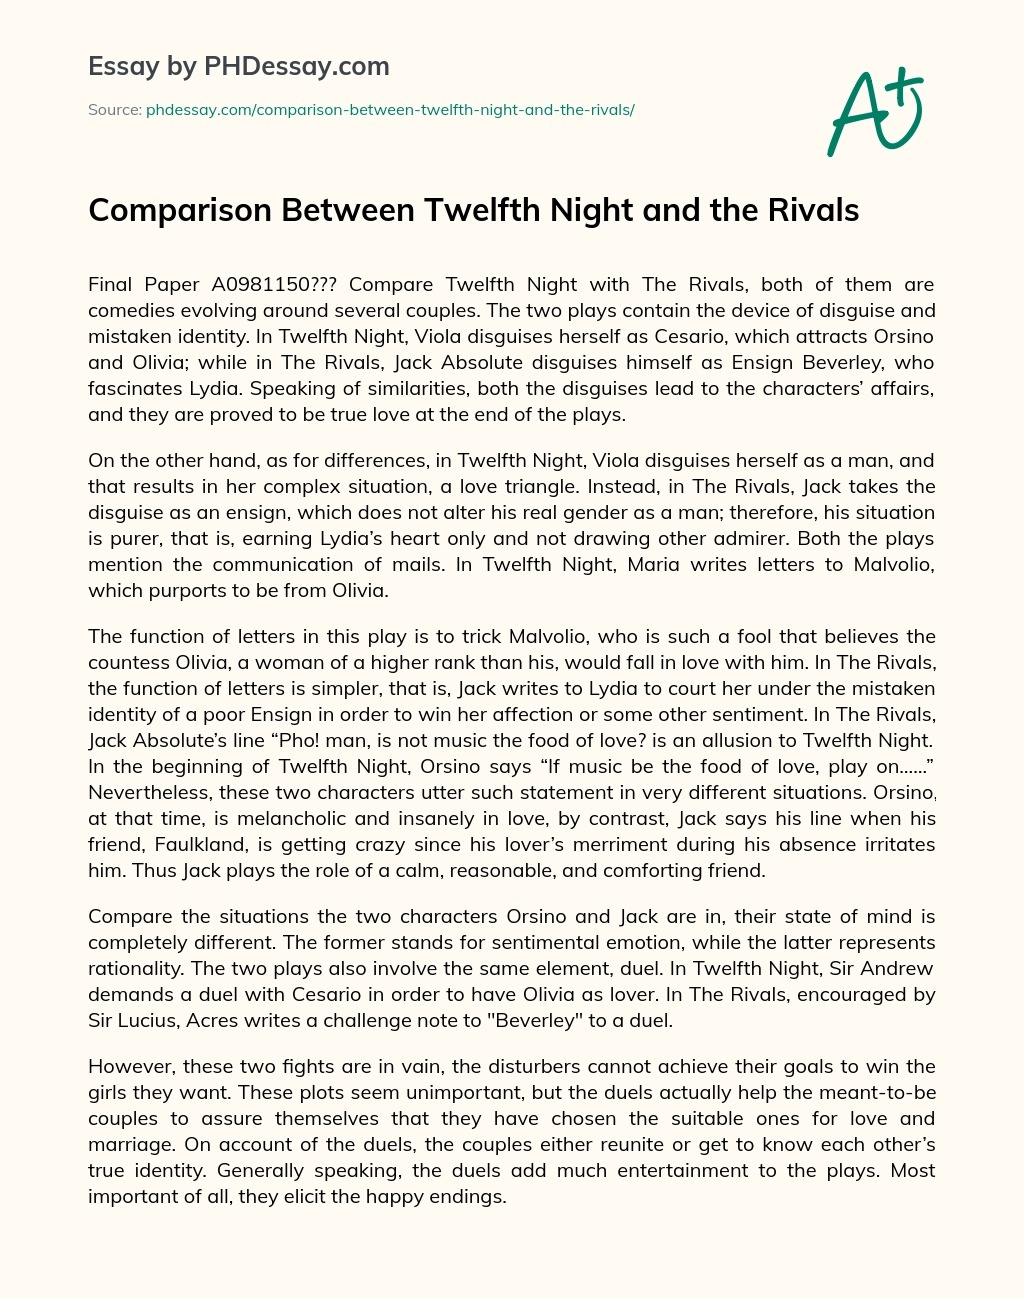 Comparison Between Twelfth Night and the Rivals essay